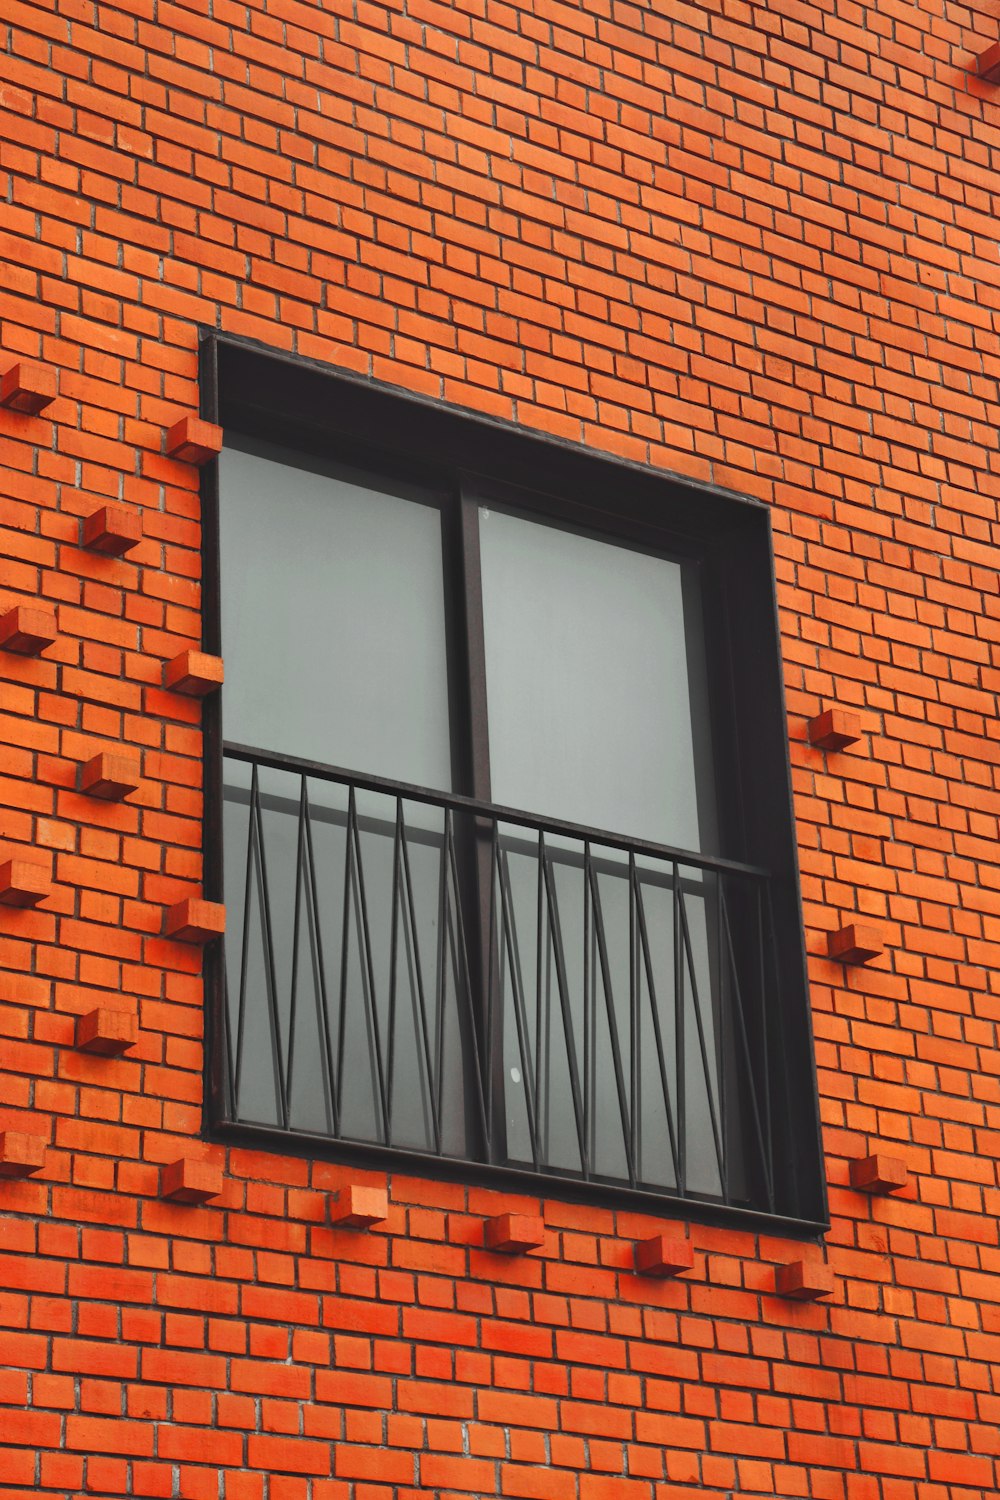 a red brick building with two windows and bars